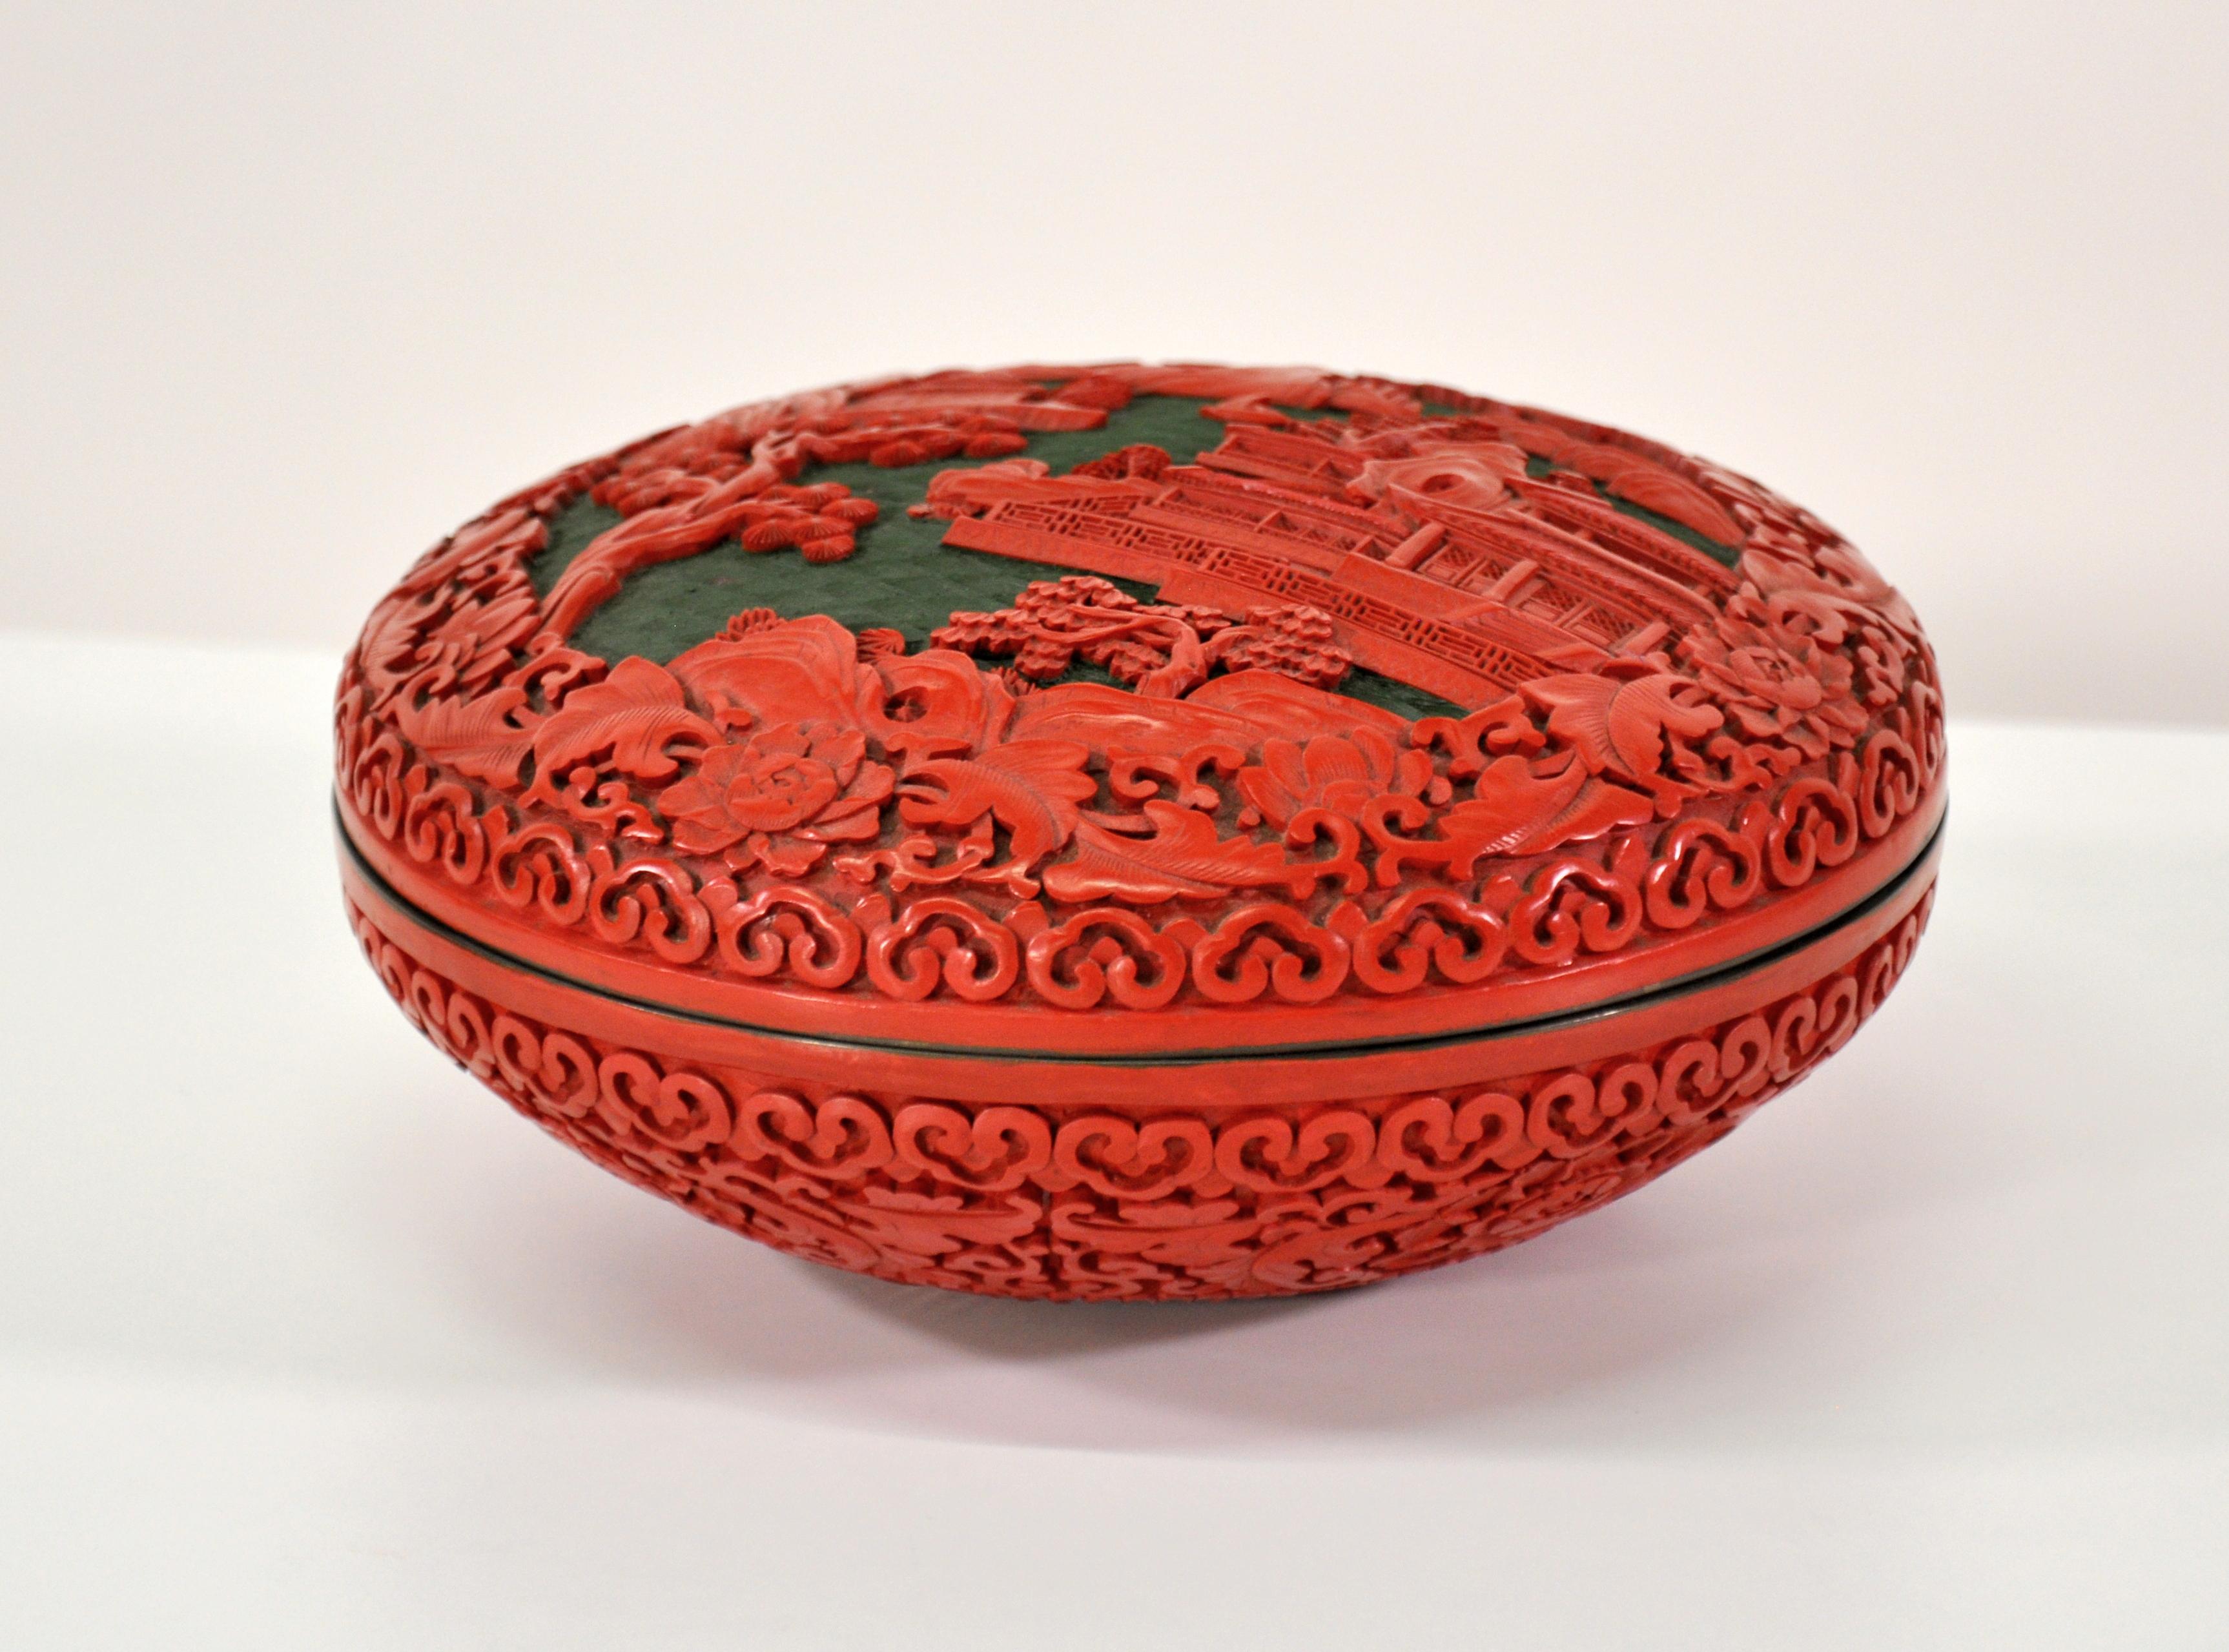 A large vintage Chinese red cinnabar box with deep relief carved lid depicting peonies, trees and a landscape with a palace. The round box has a domed lid and a black lacquer interior with brass rim.
In Chinese culture, the peony represents